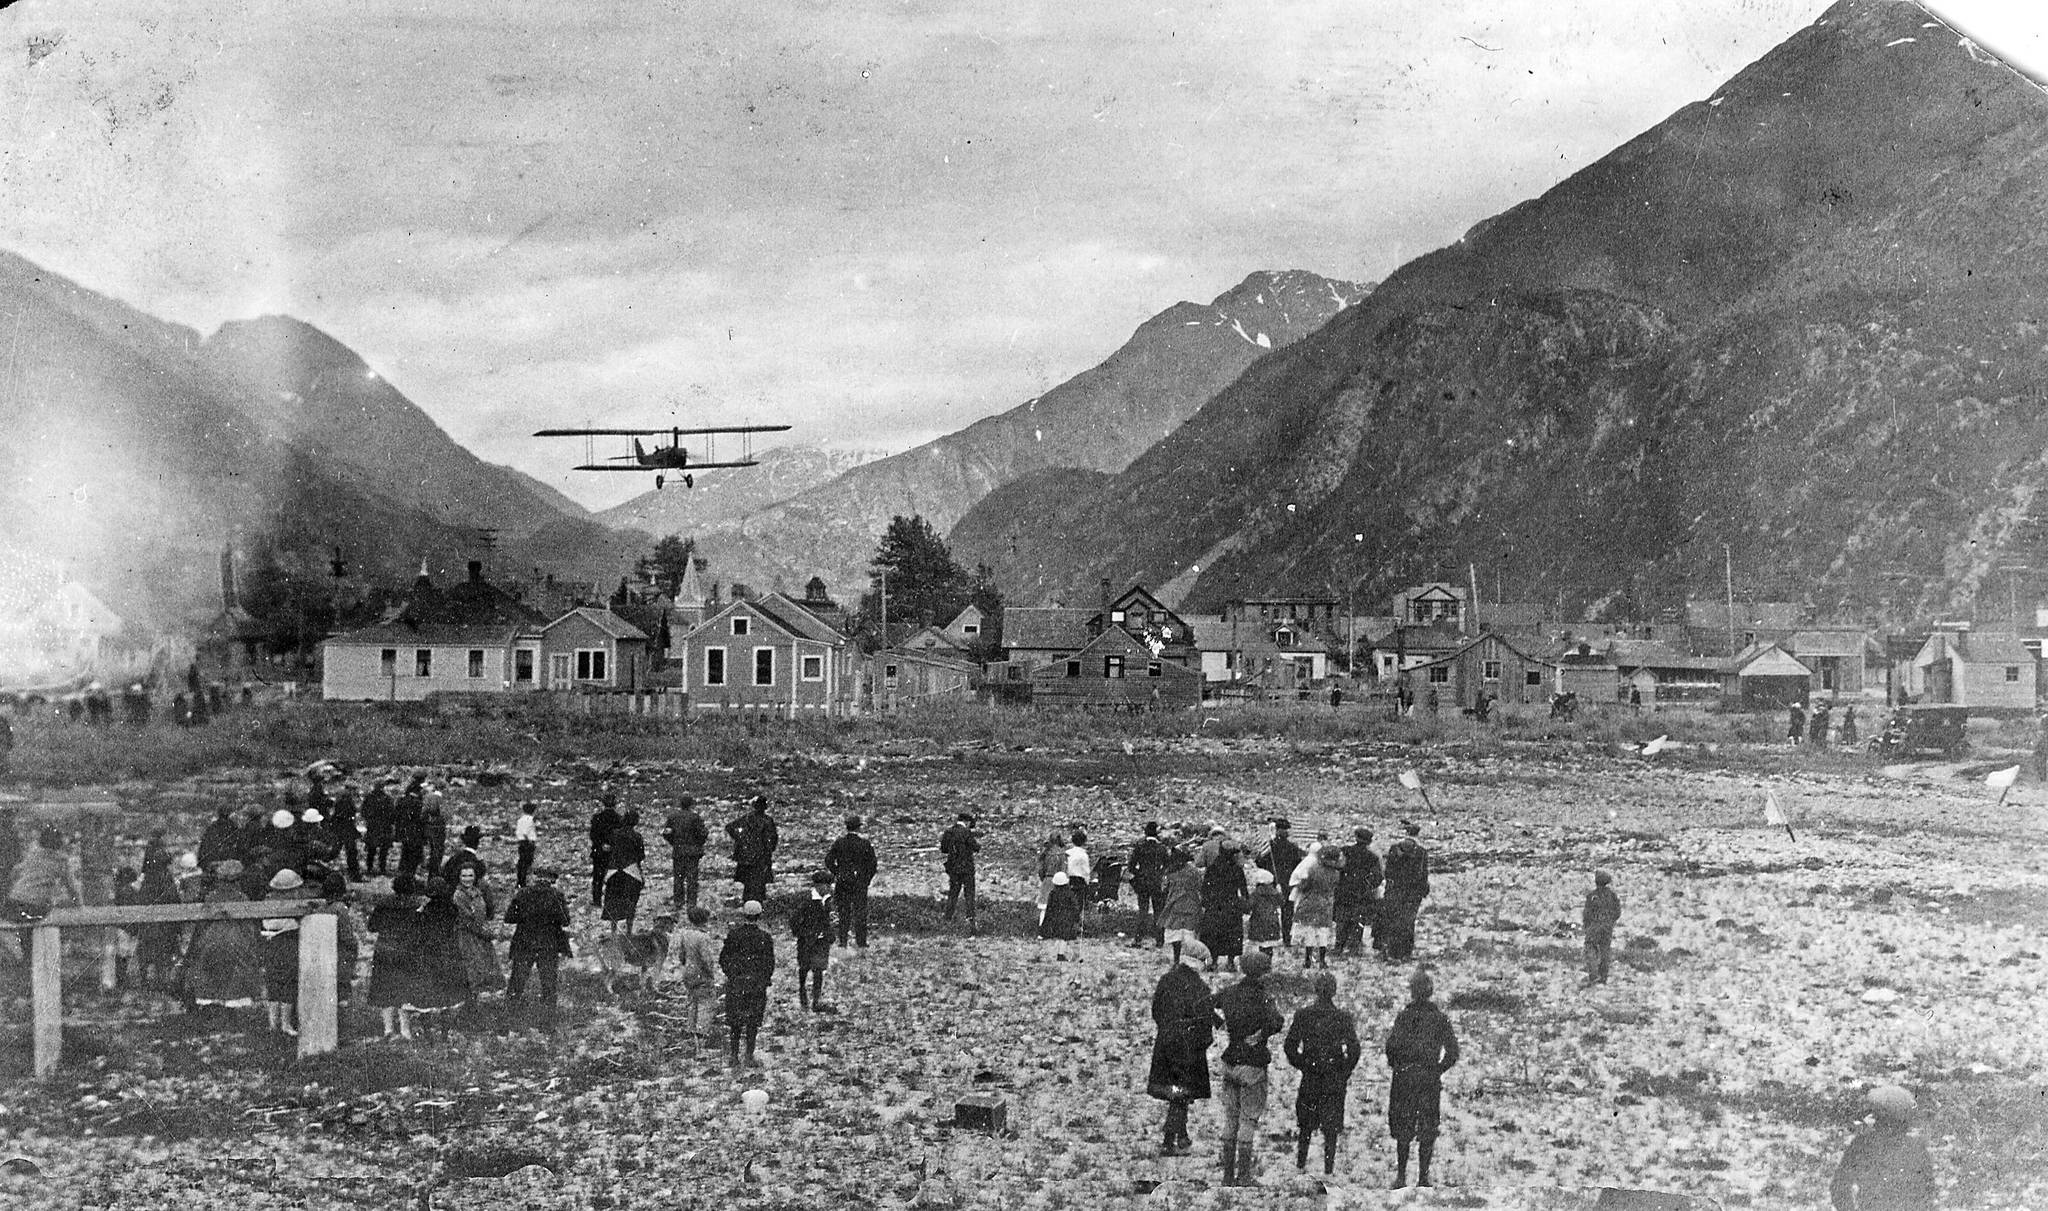 Clearance Oliver Prest’s first landing of an airplane on the Skagway beach on July 6, 1922. Image courtesy of the National Park Service, Klondike Gold Rush National Historical Park, Candy Waugaman Collection, KLGO TA-8-8917.